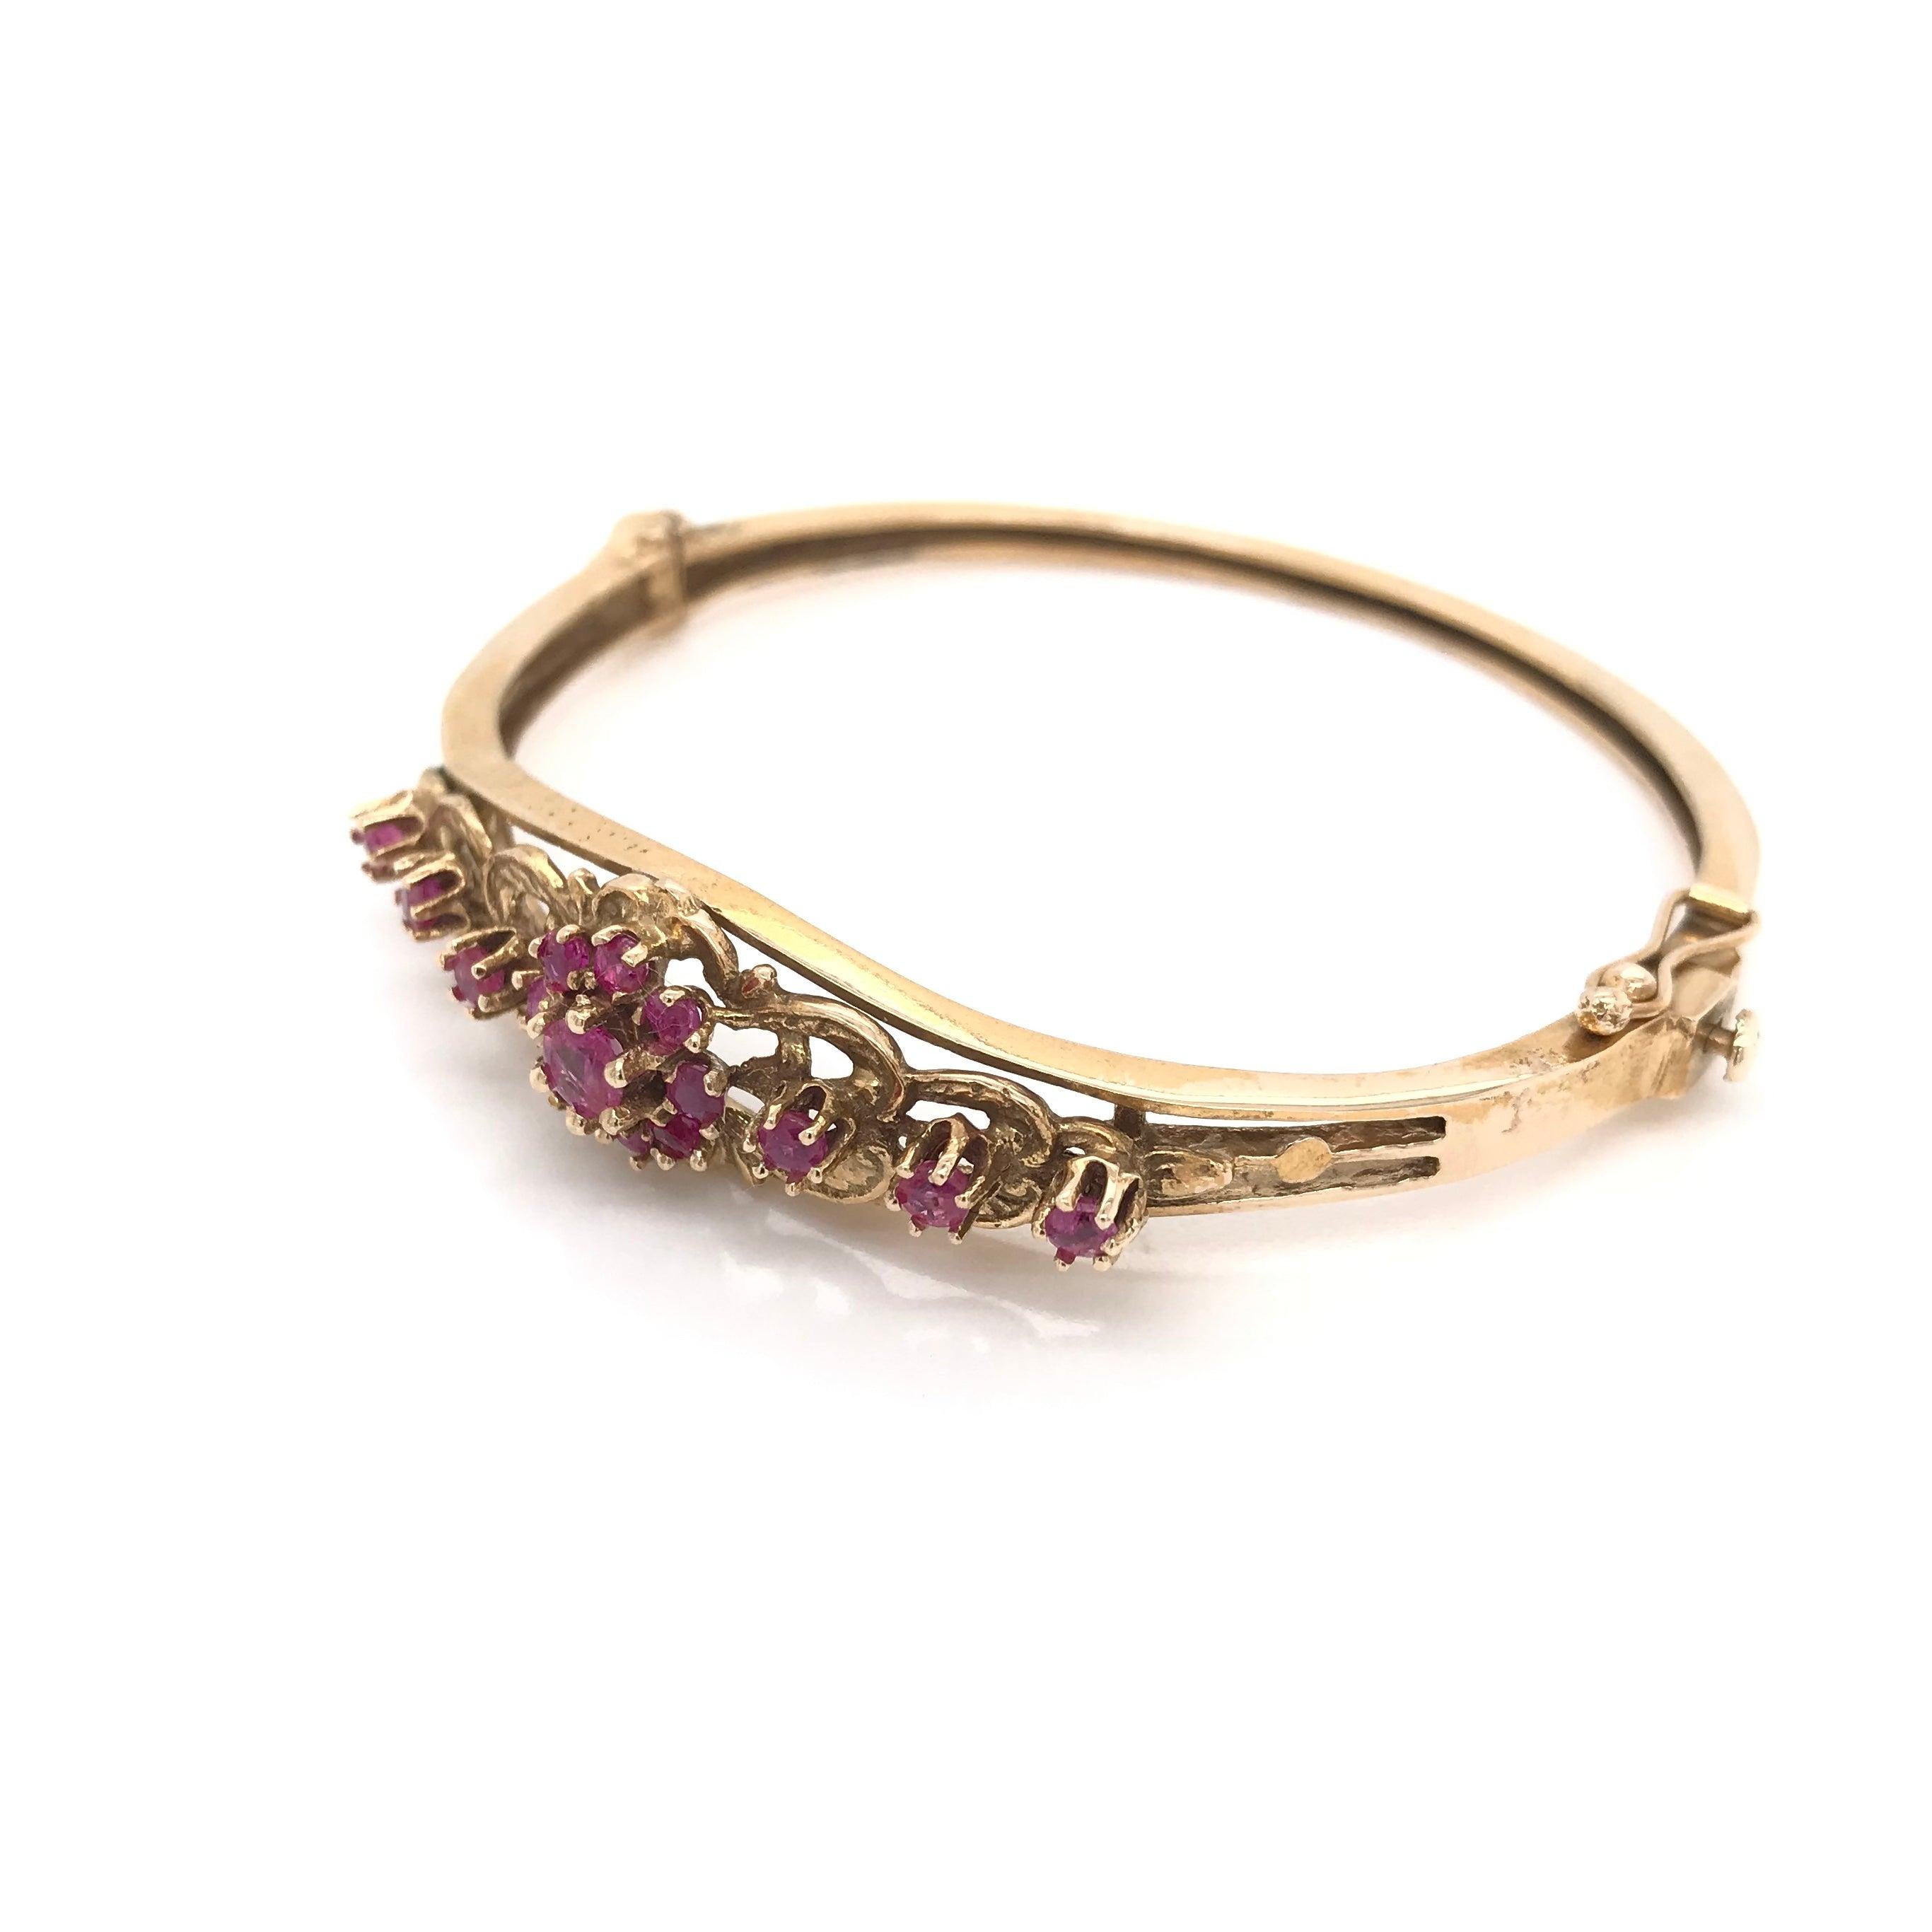 This retro ruby and gold bangle was crafted sometime during the Mid Century design period (1940-1960). Rubies were the gemstone darling of the retro design period; This 14k gold bangle features 15 round rubies set in a lovely floral motif.